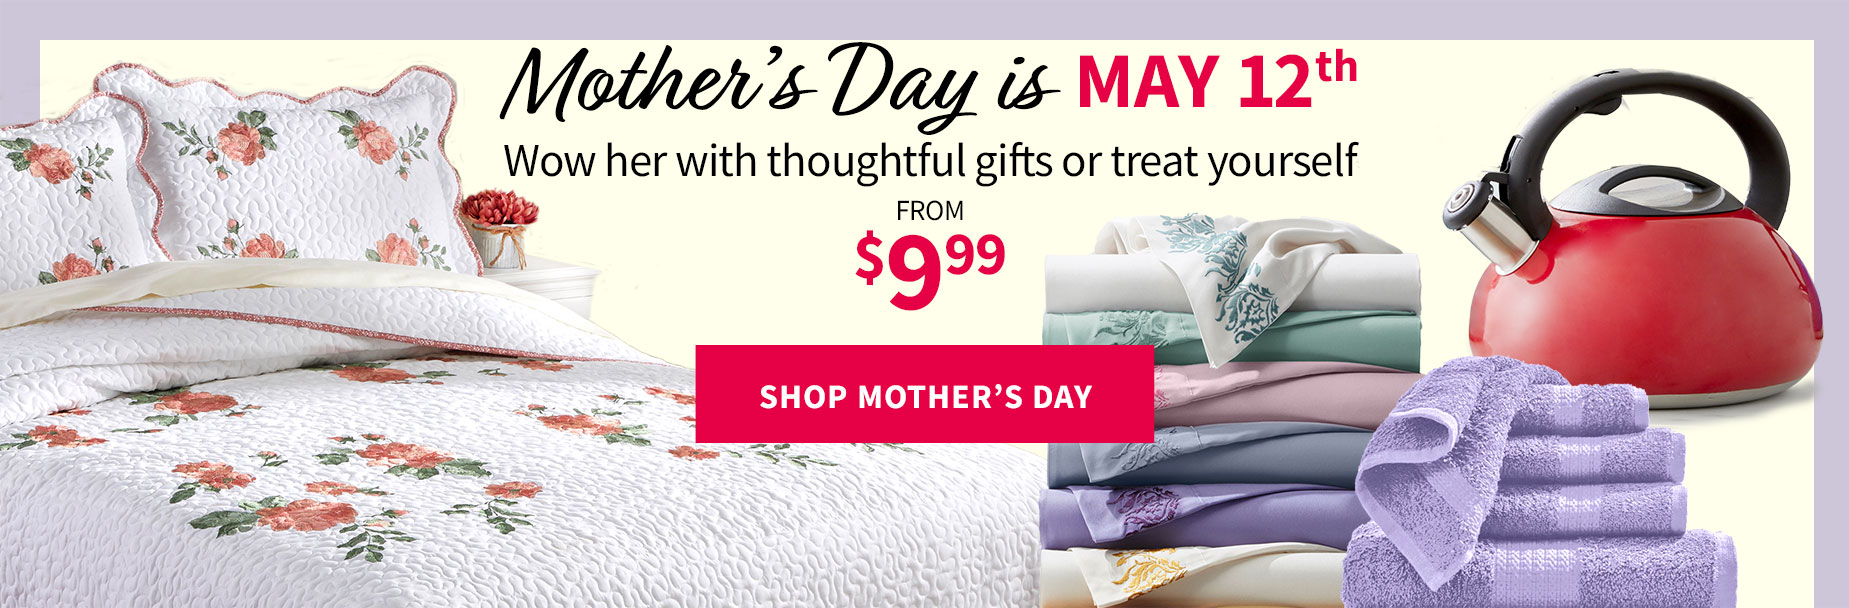 Mother's day is May 12th. Wow her with thoughtful gifts or treat yourself from $9.99.